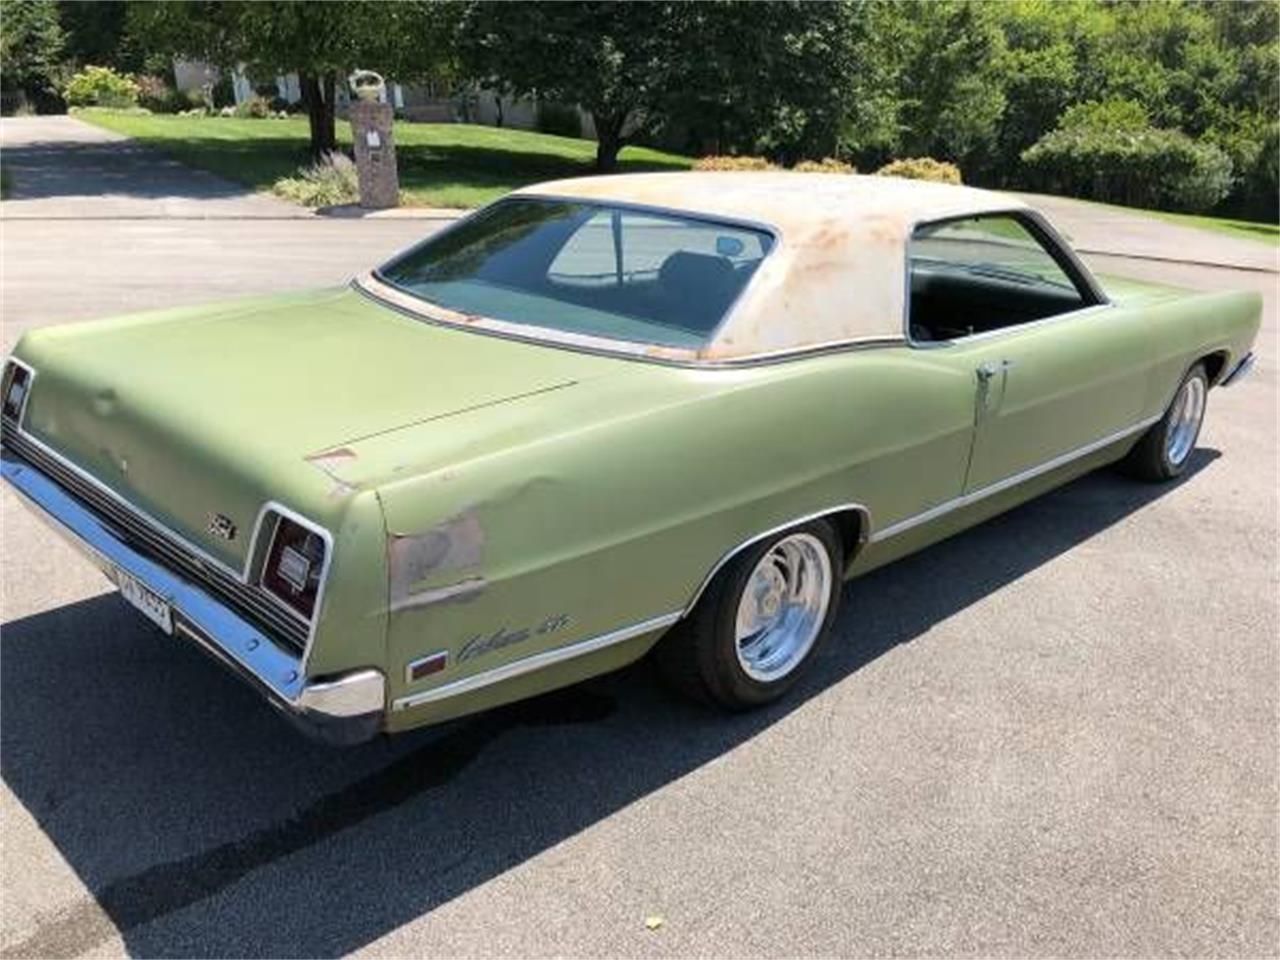 For Sale: 1969 Ford Galaxie 500 in Cadillac, Michigan.